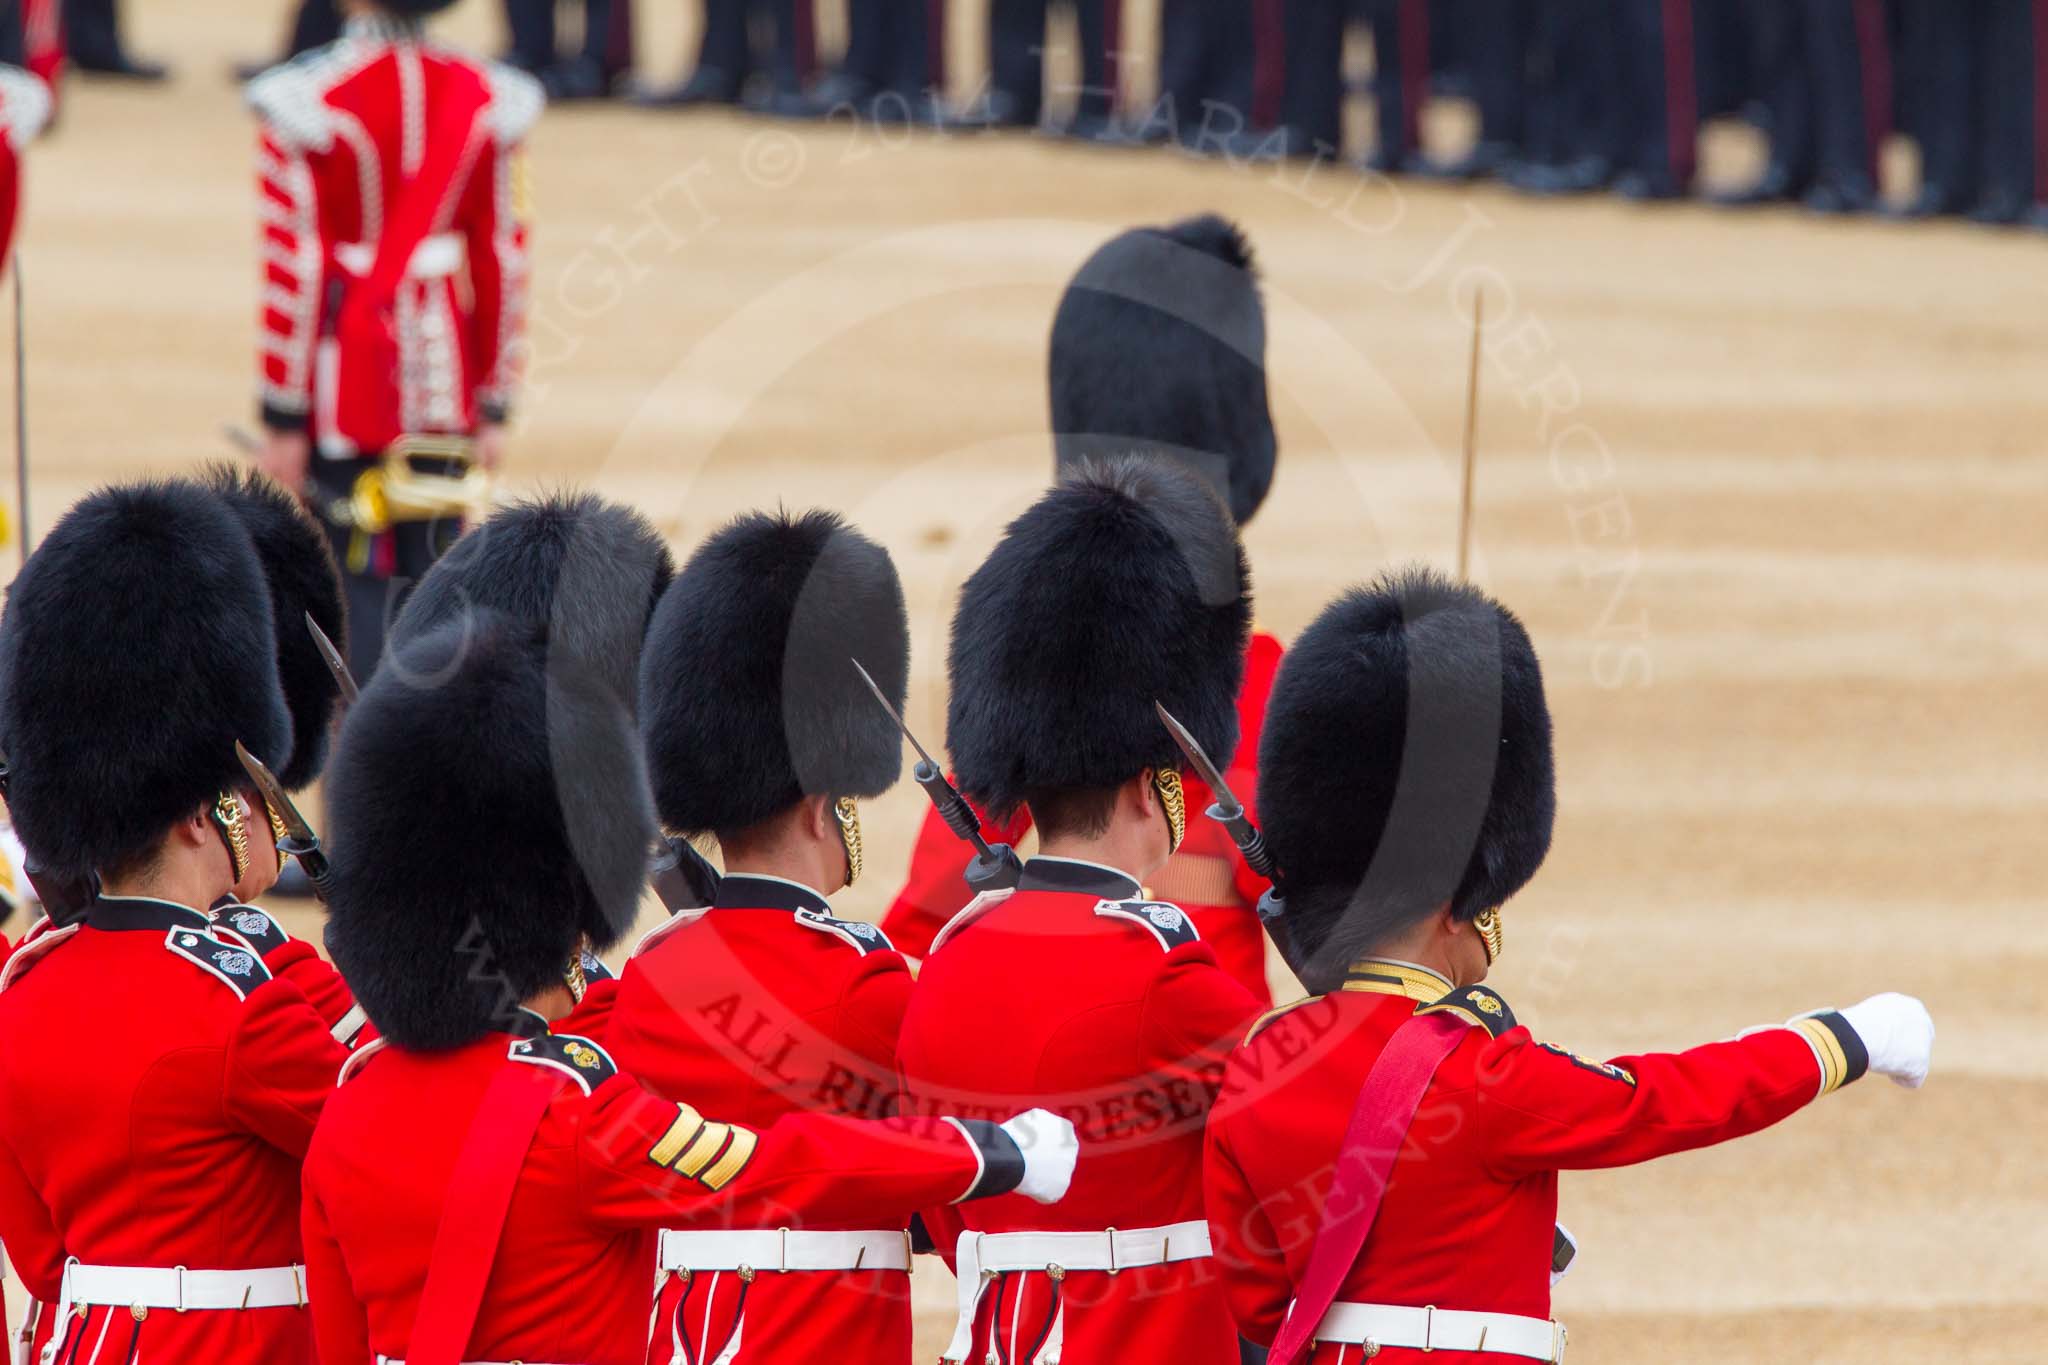 Trooping the Colour 2014.
Horse Guards Parade, Westminster,
London SW1A,

United Kingdom,
on 14 June 2014 at 11:19, image #515